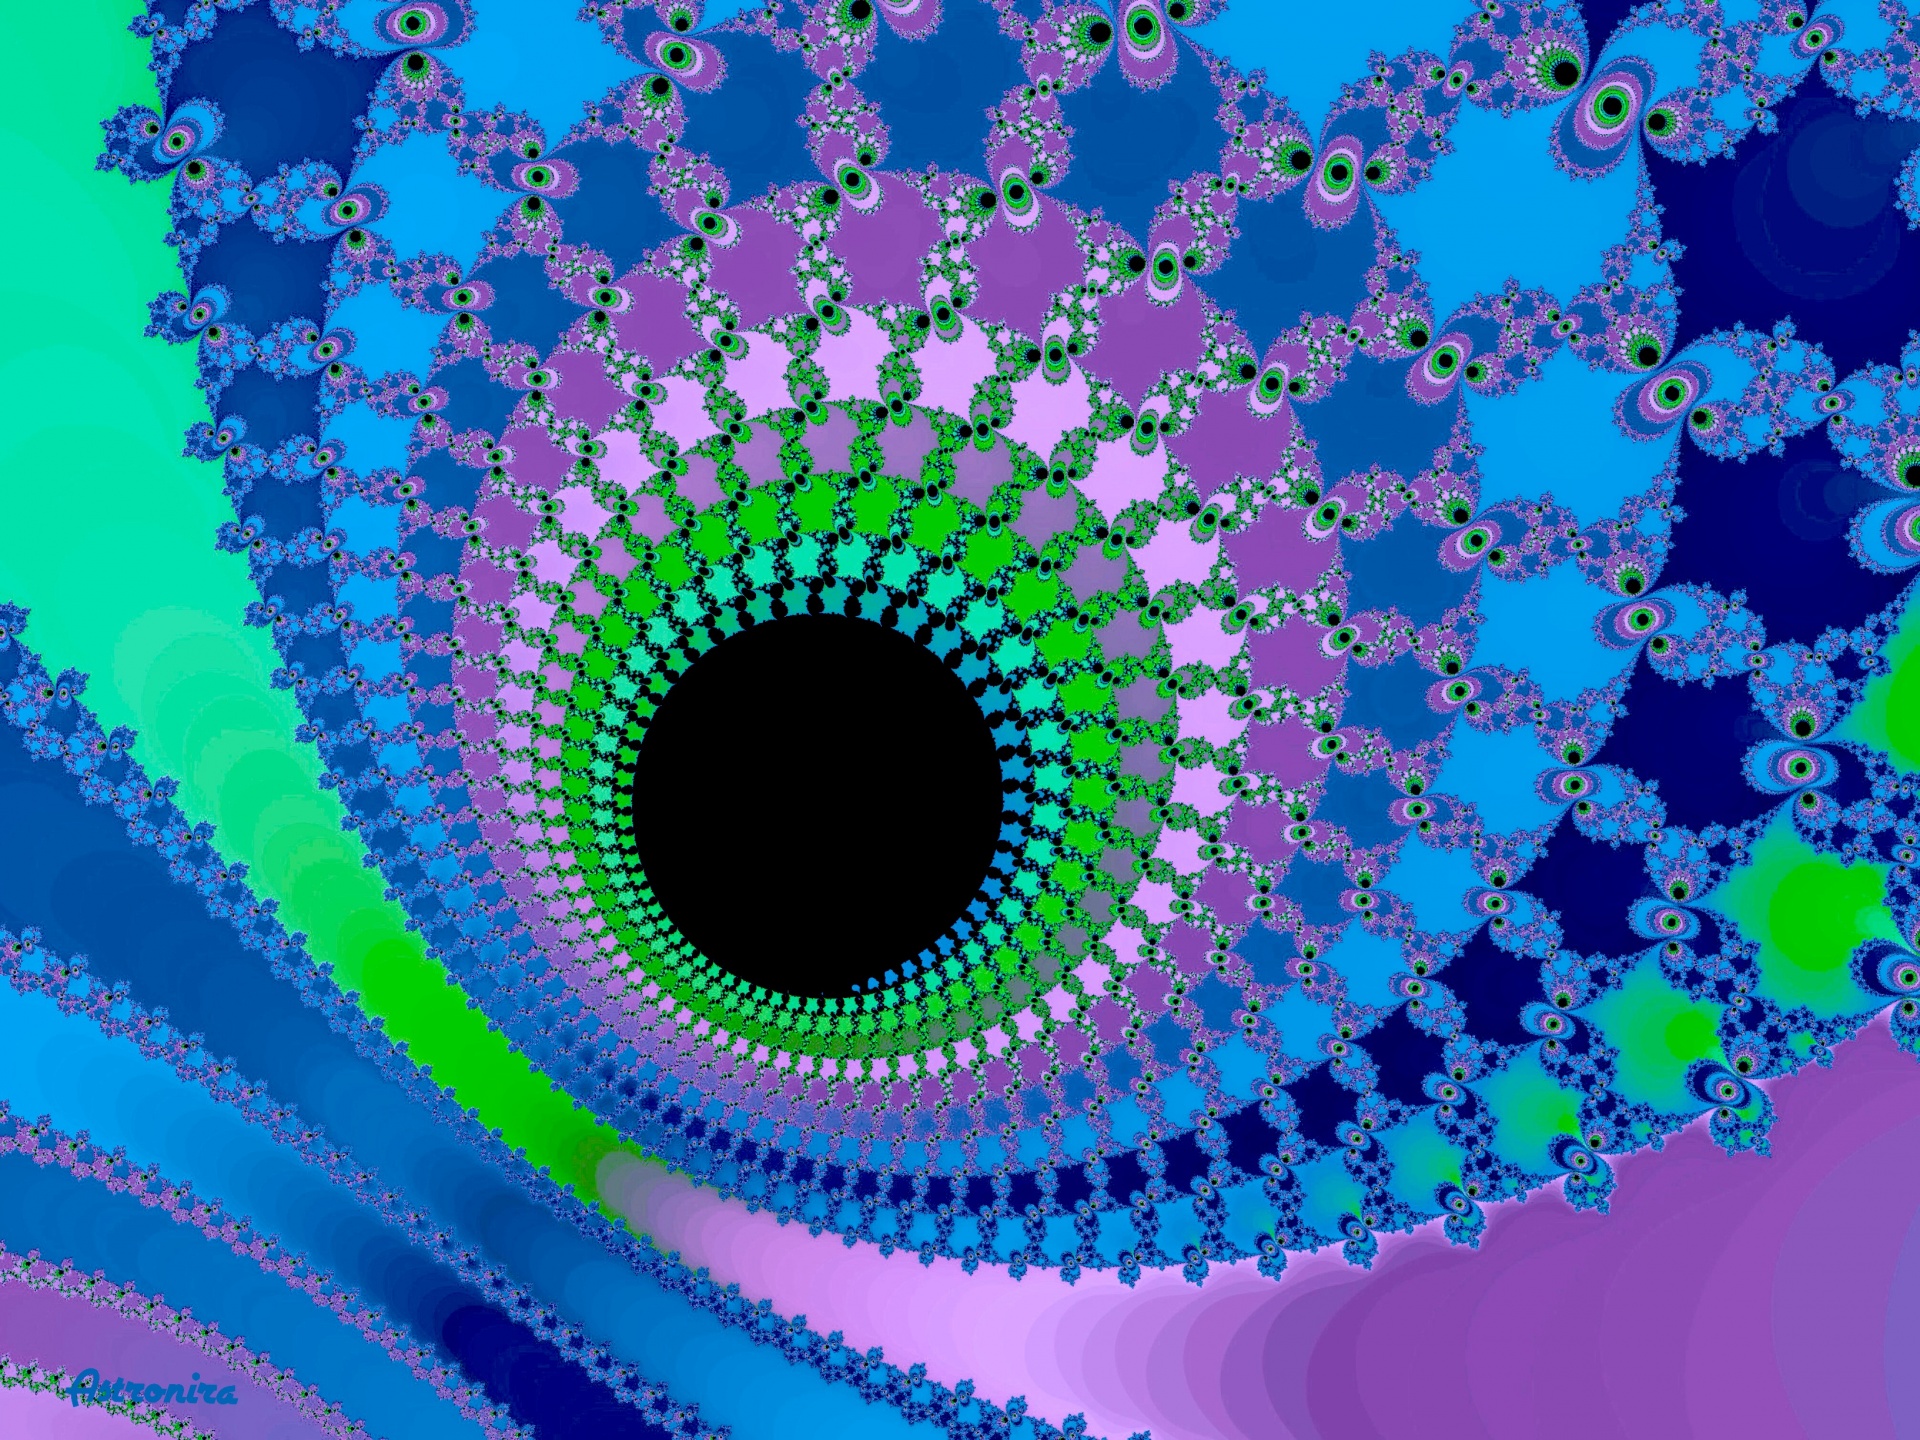 Fractal Spiral In A Bright Colors